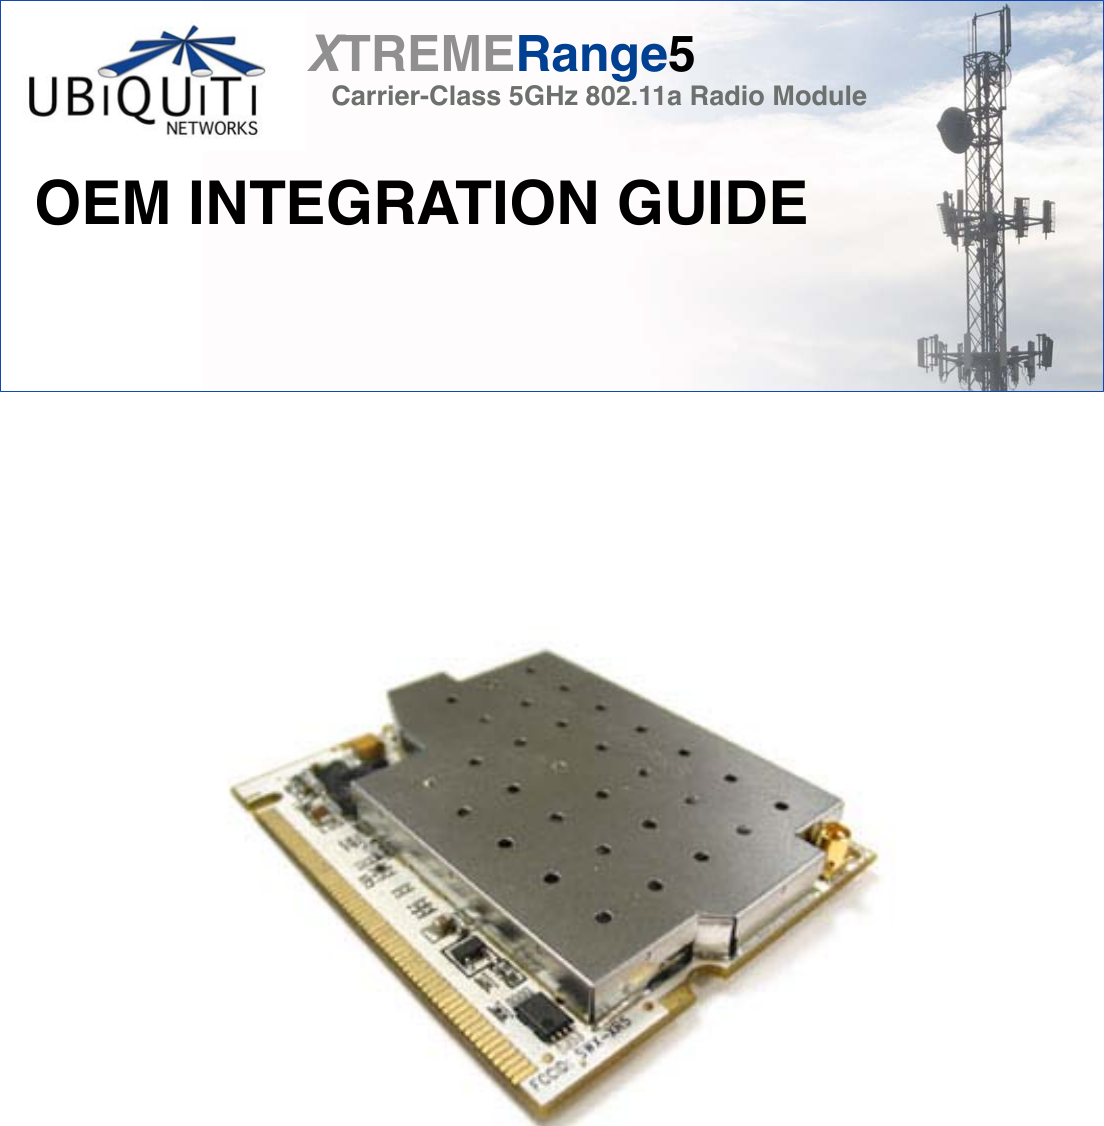 XTREMERange5OEM INTEGRATION GUIDECarrier-Class 5GHz 802.11a Radio Module